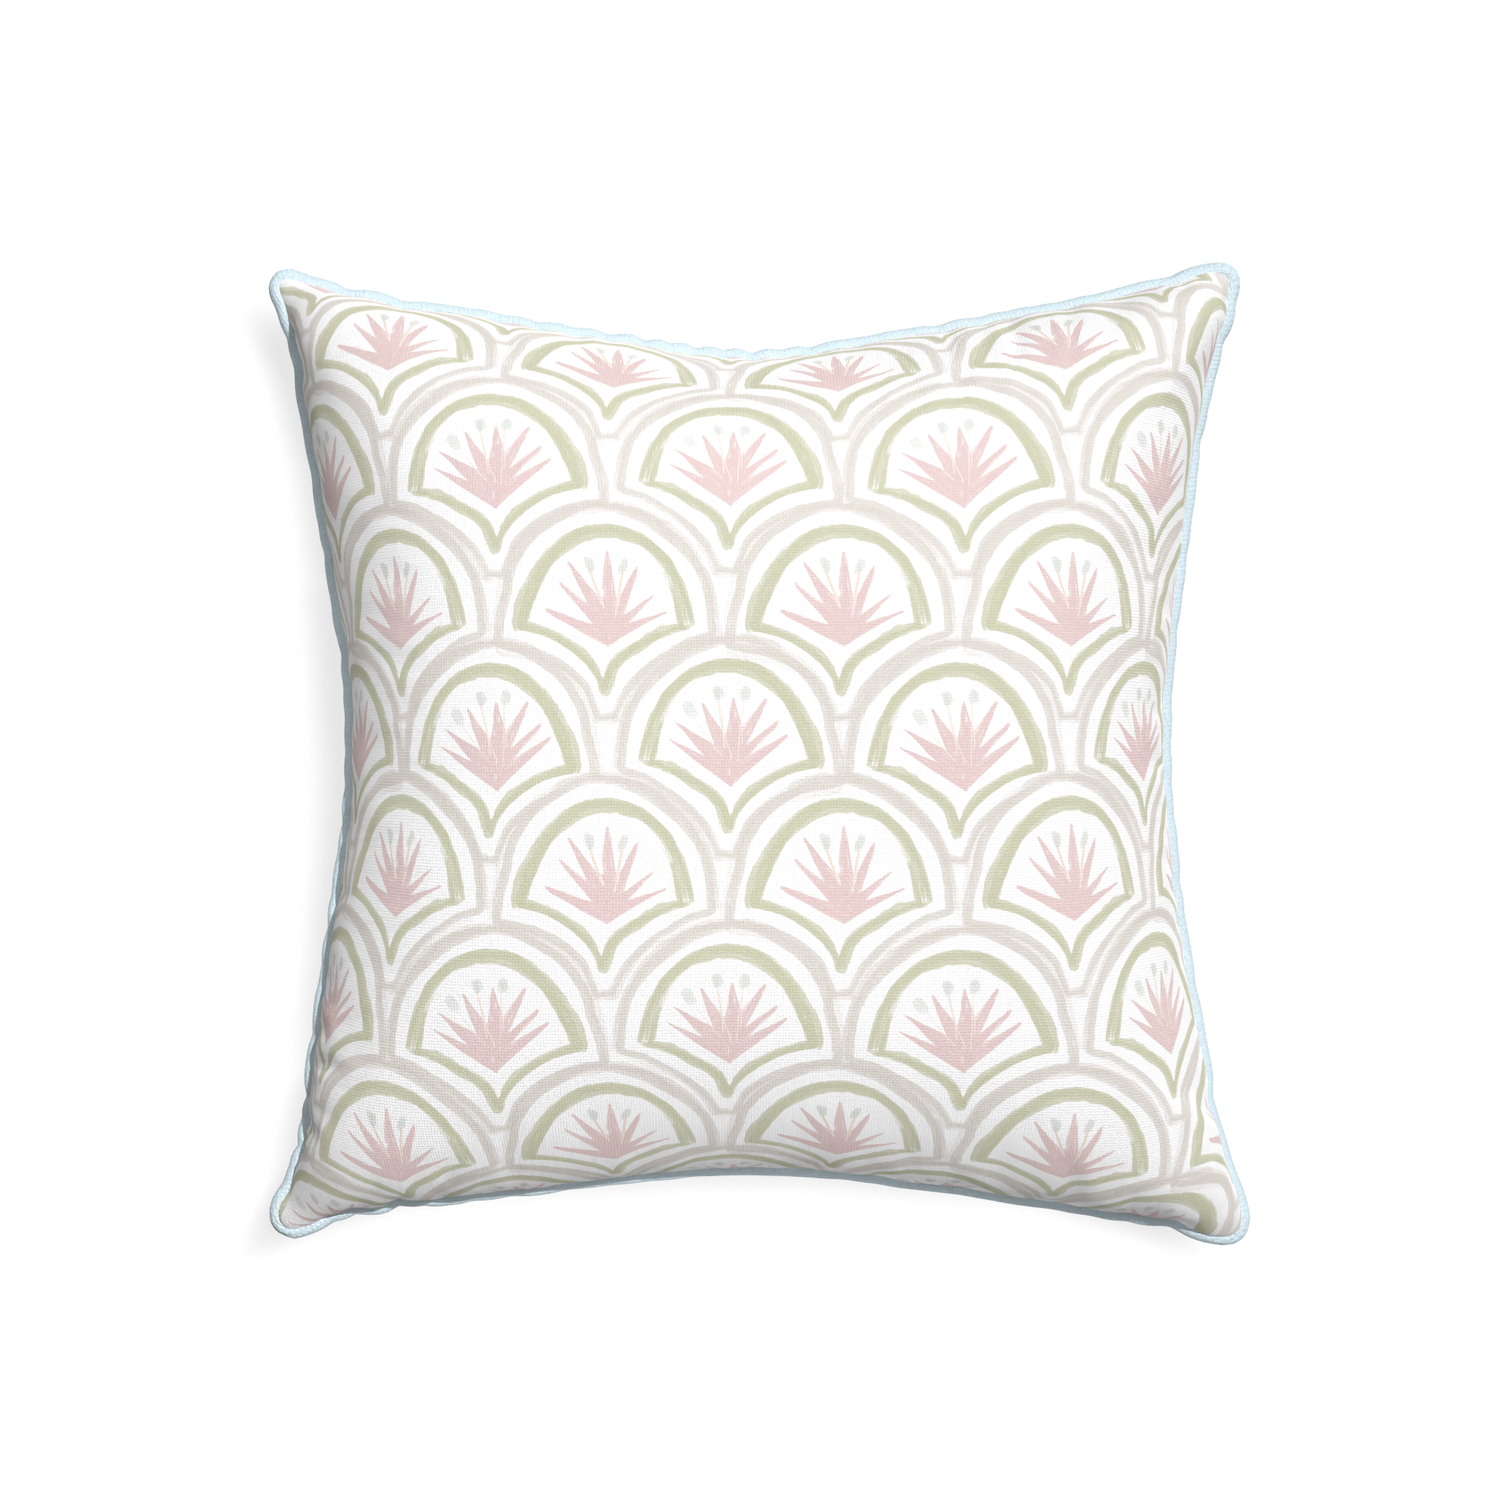 22-square thatcher rose custom pillow with powder piping on white background